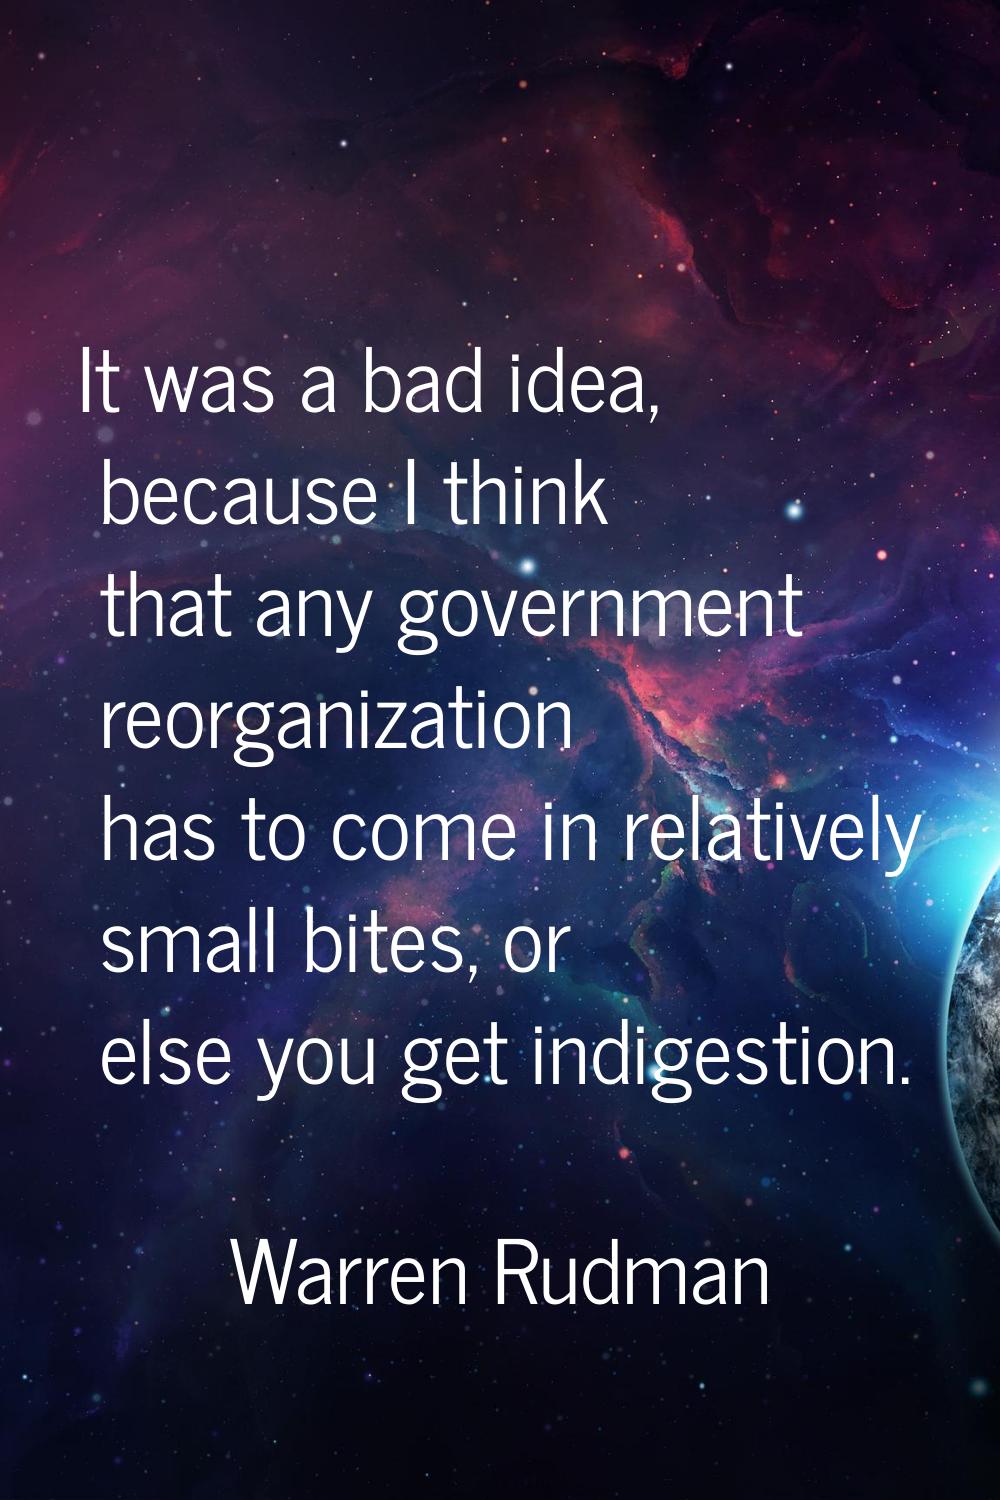 It was a bad idea, because I think that any government reorganization has to come in relatively sma